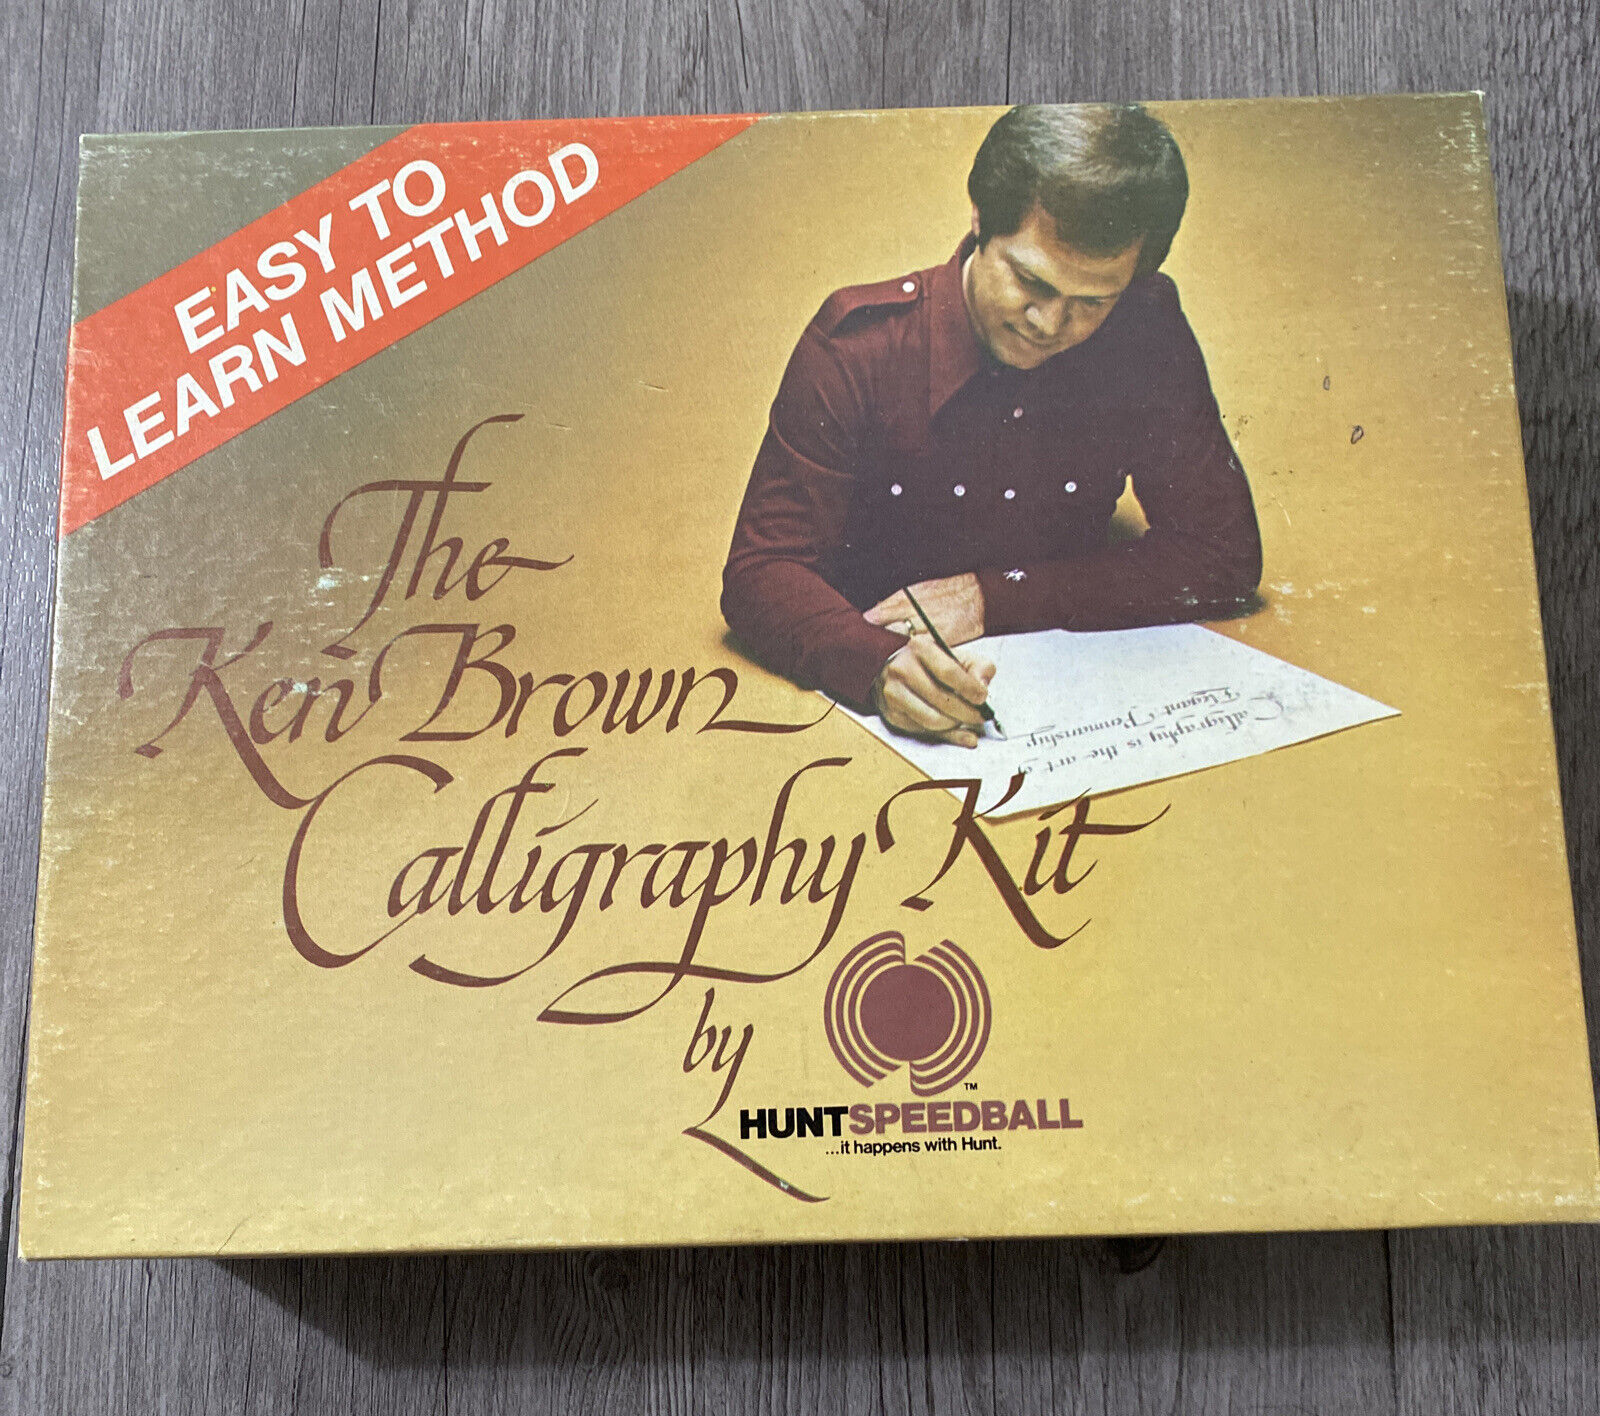 Ken Brown Calligraphy Kit. Sealed Never Used